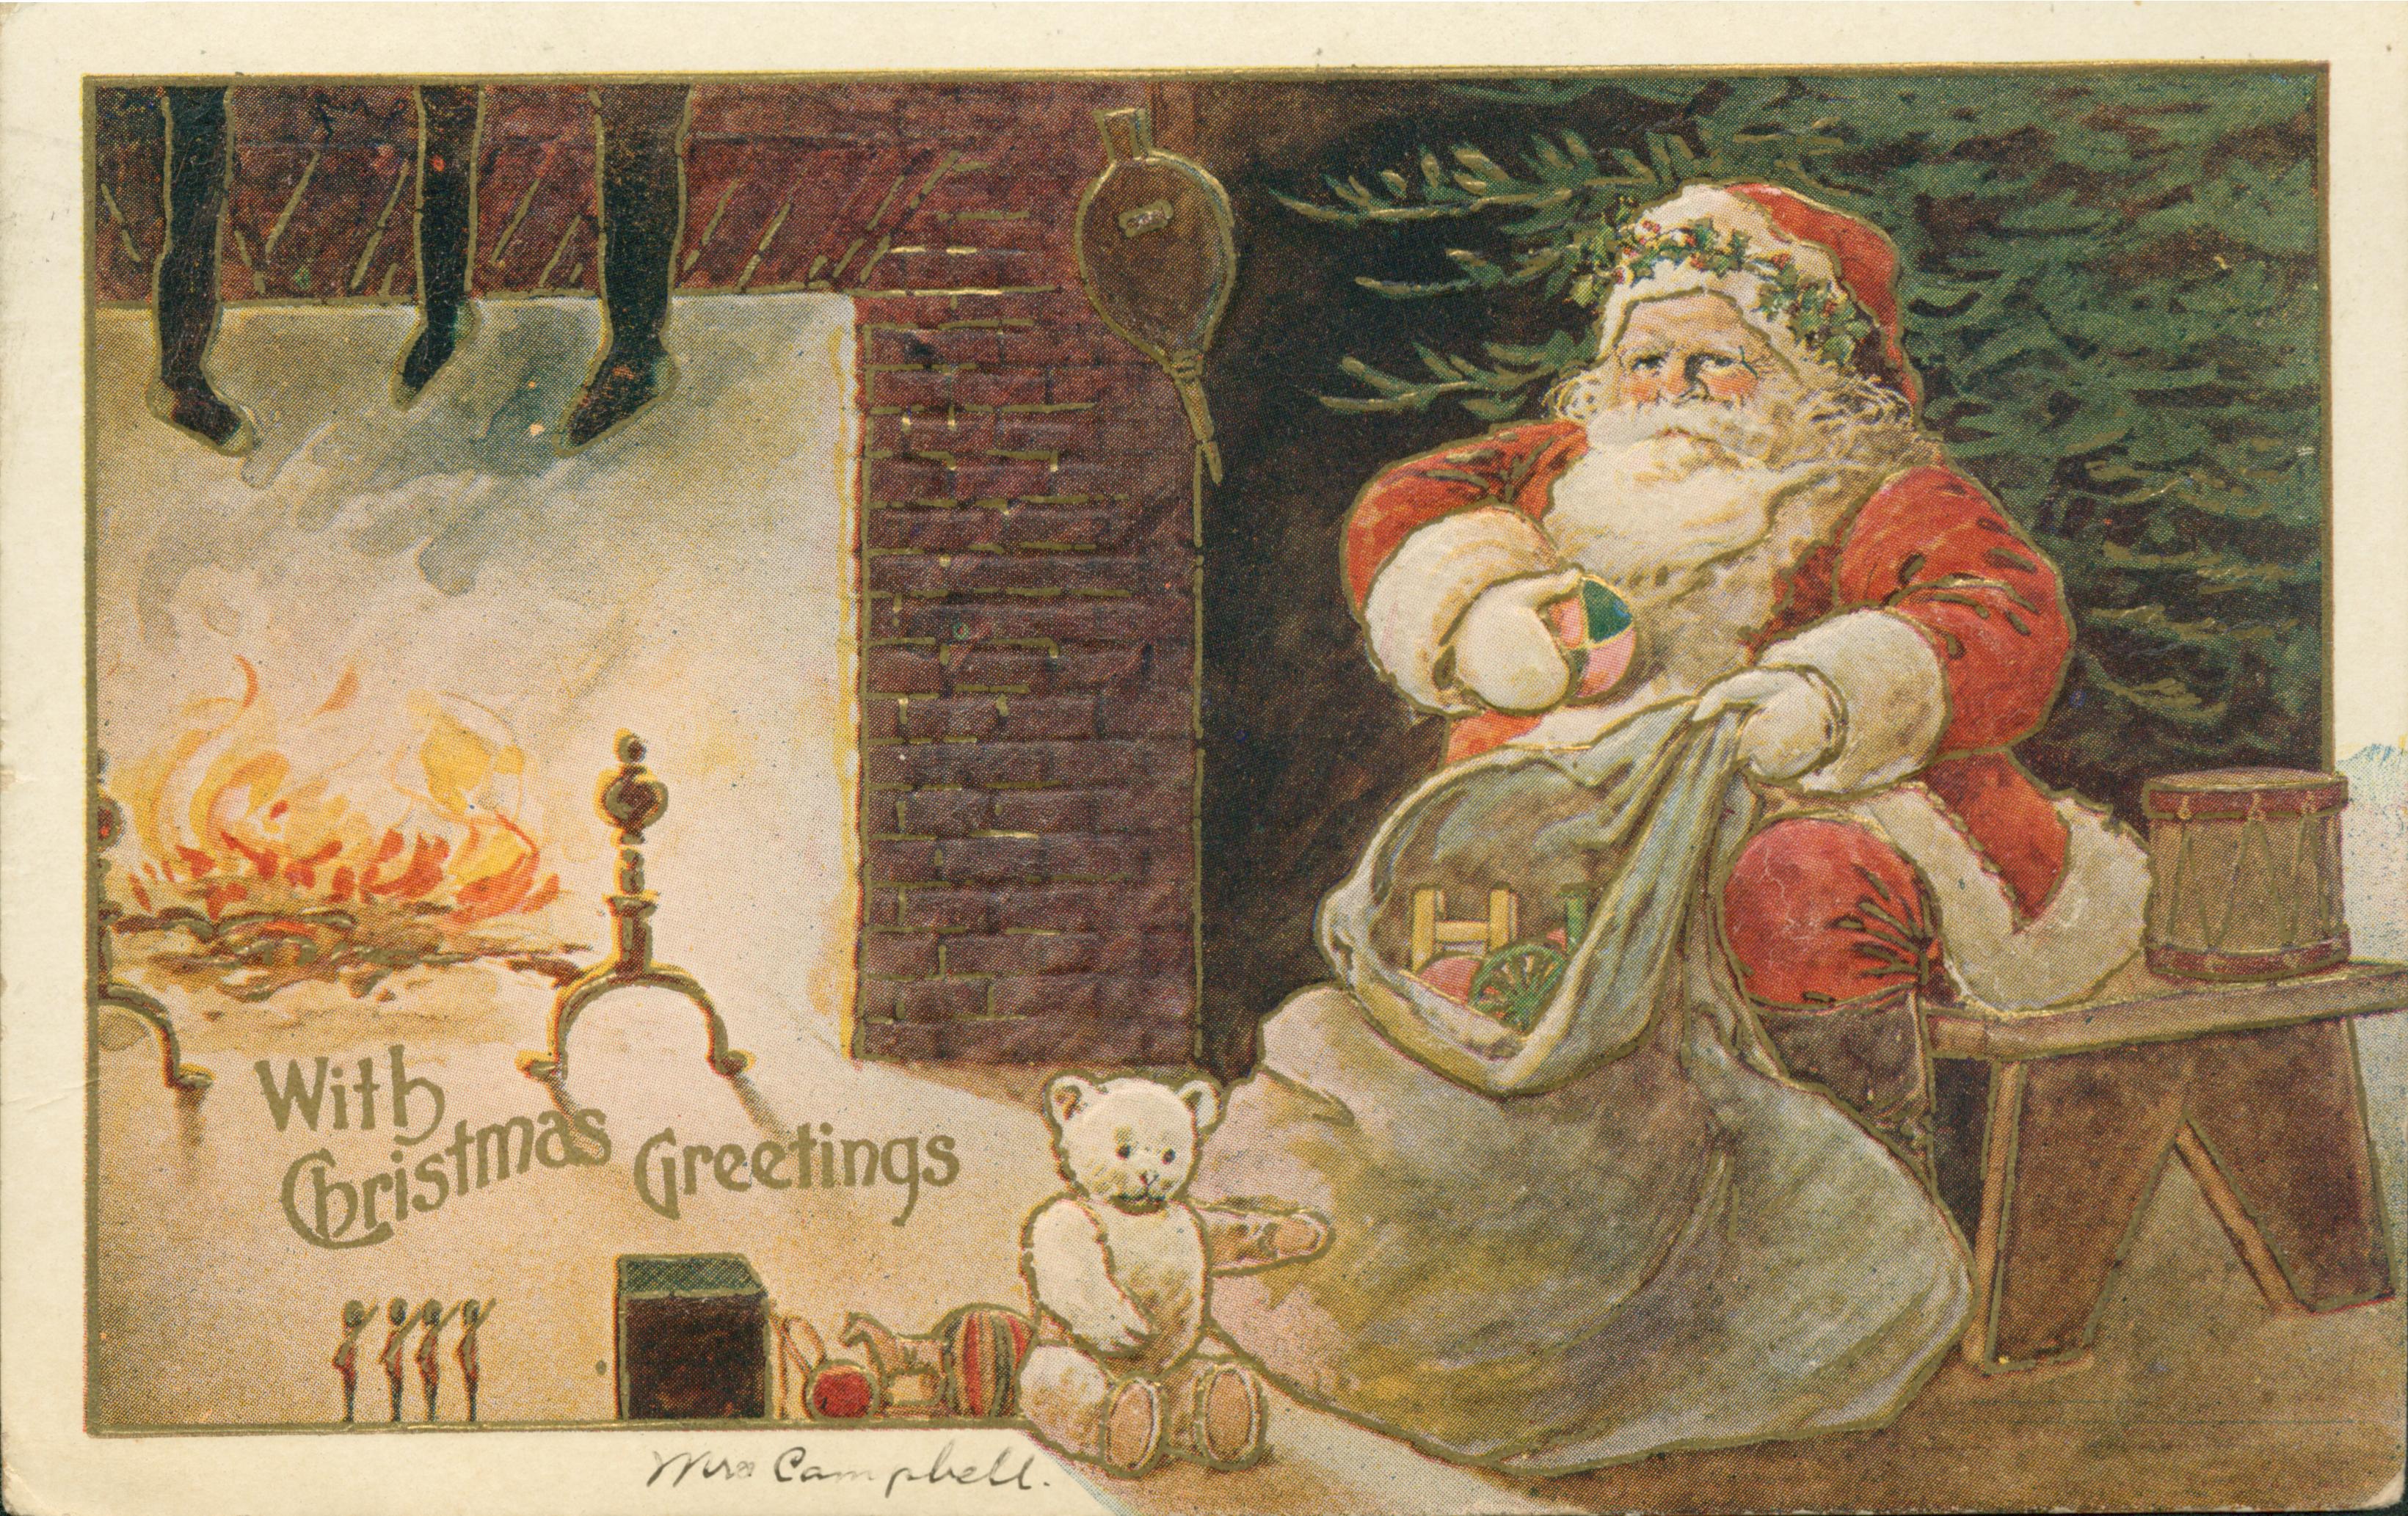 Shows Santa Claus unpacking gifts in front of a fireplace and a Christmas Tree